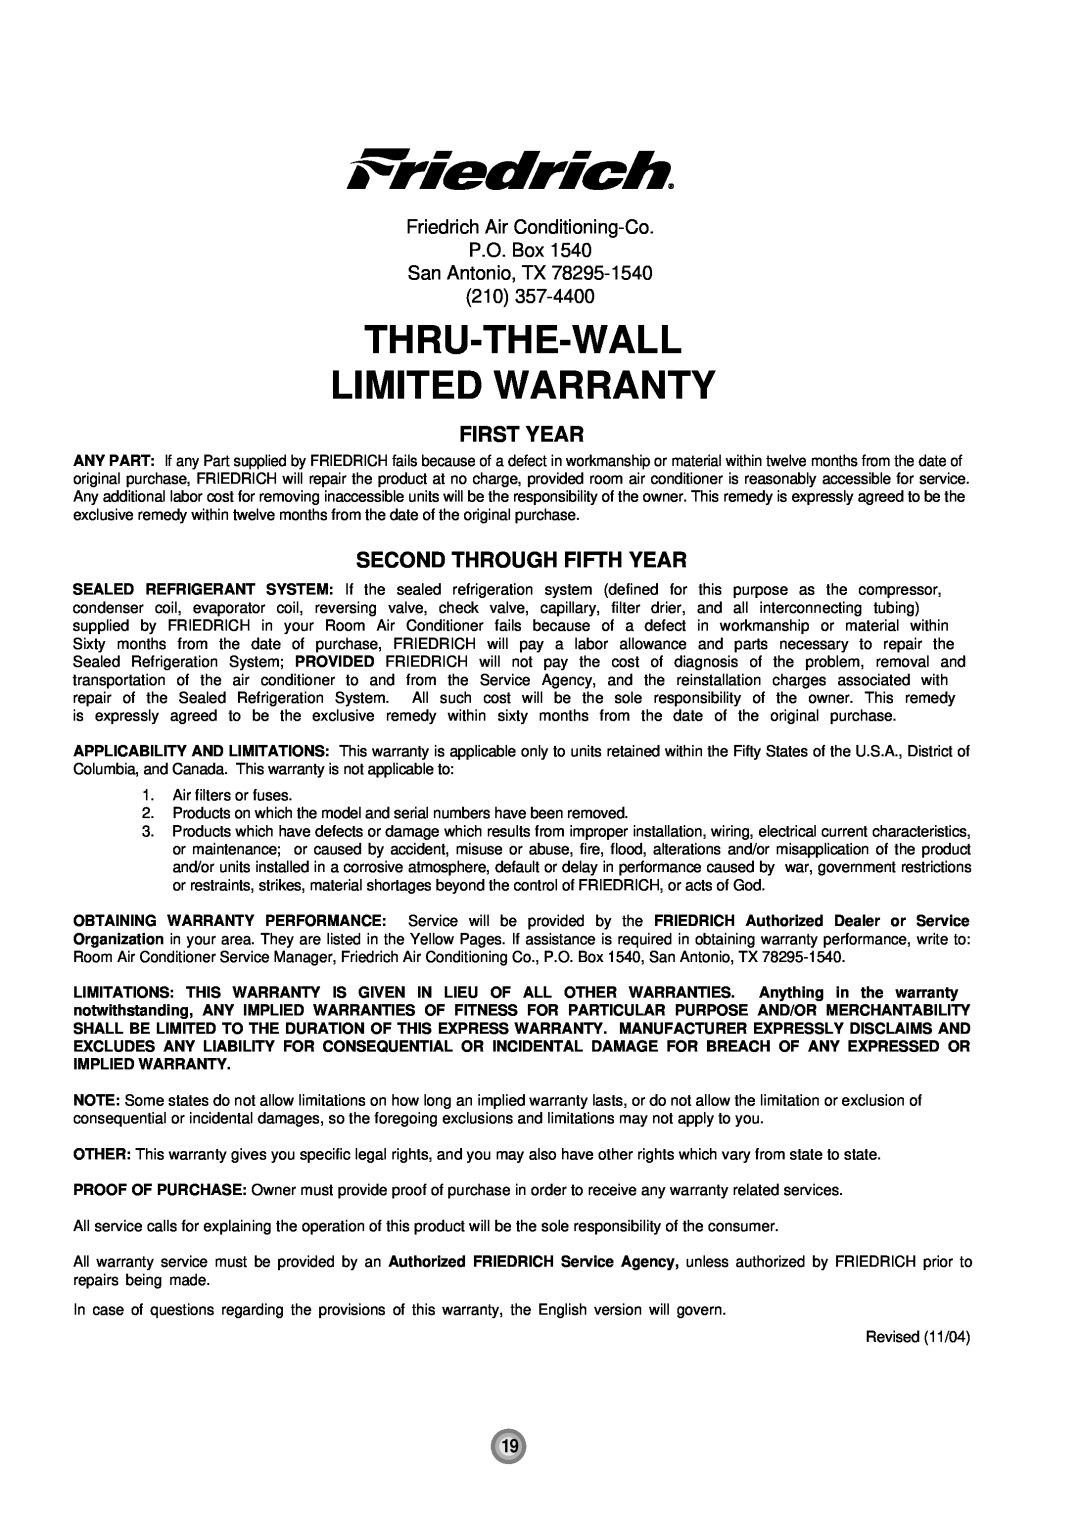 Friedrich US08, US10, US12 manual Thru-The-Wall Limited Warranty, First Year, Second Through Fifth Year 